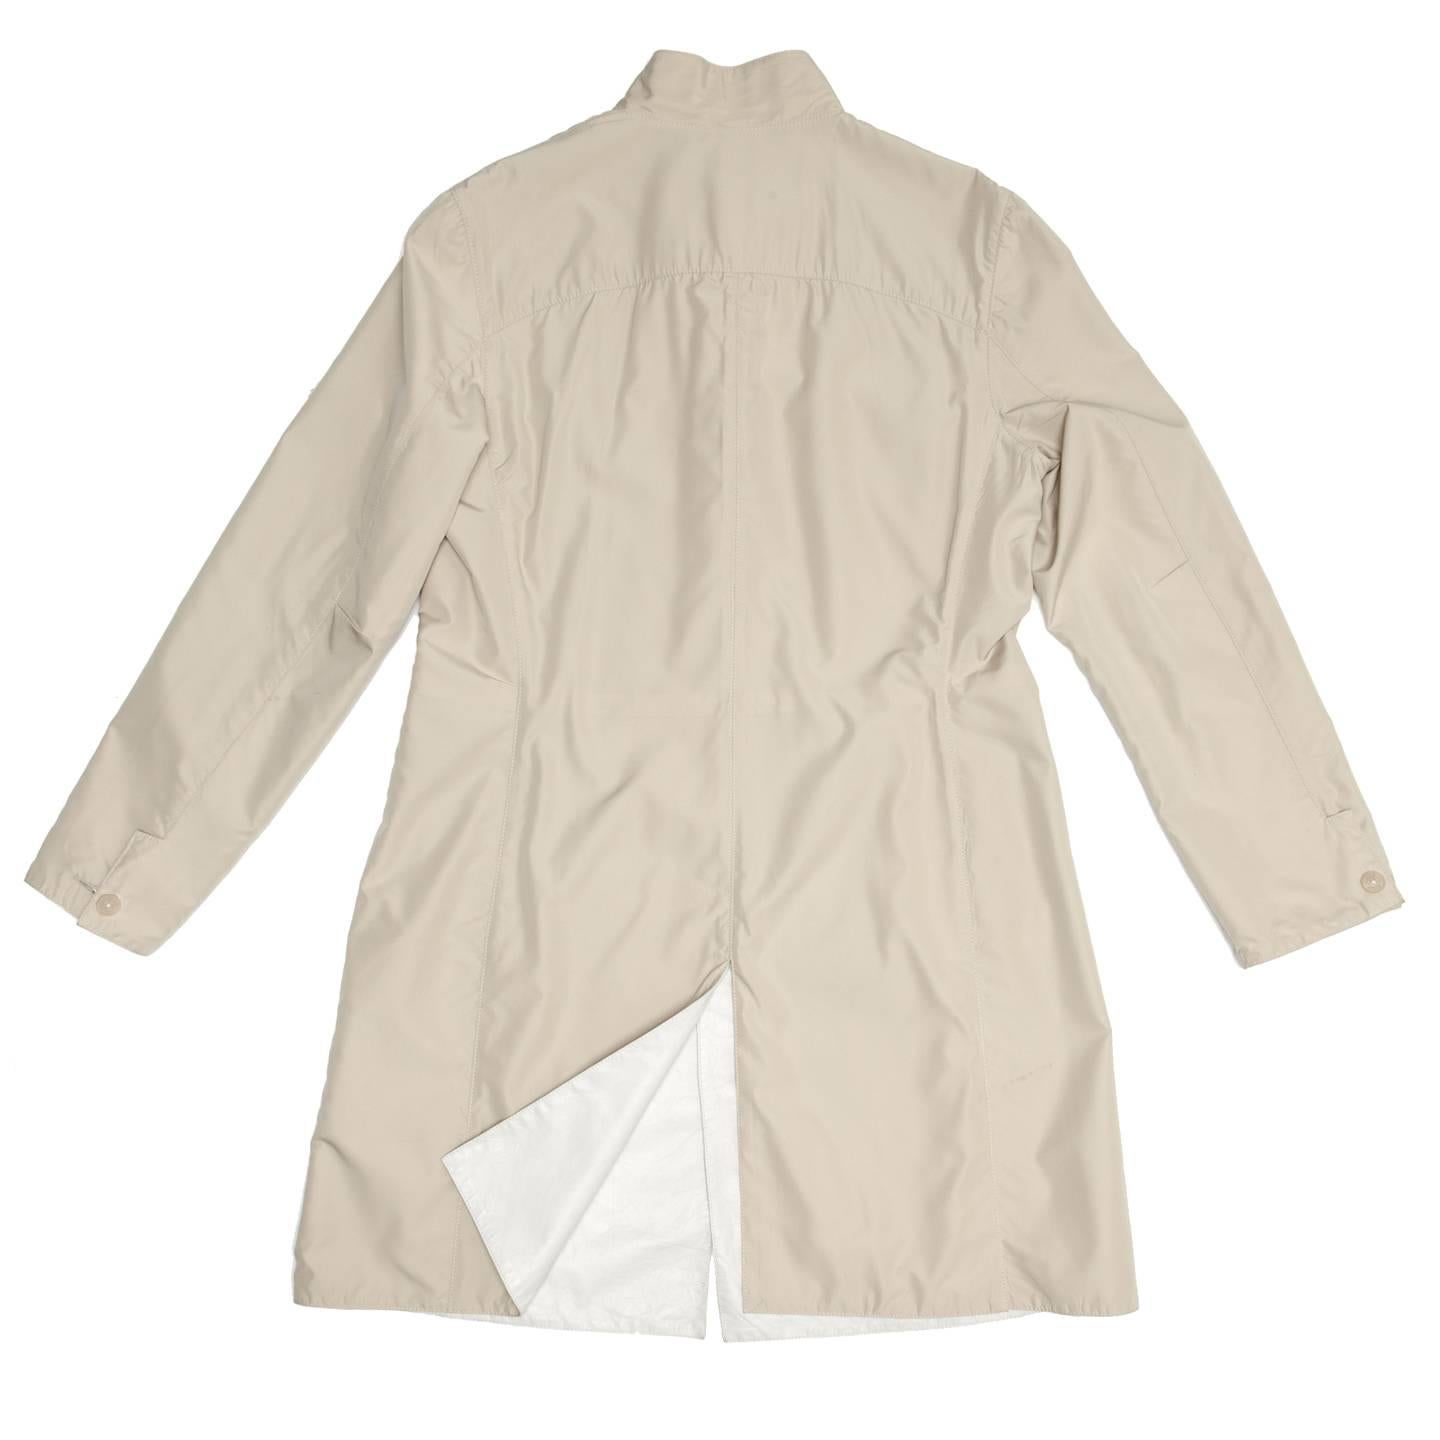 Jil Sander White Leather Reversible Coat In Excellent Condition For Sale In Brooklyn, NY